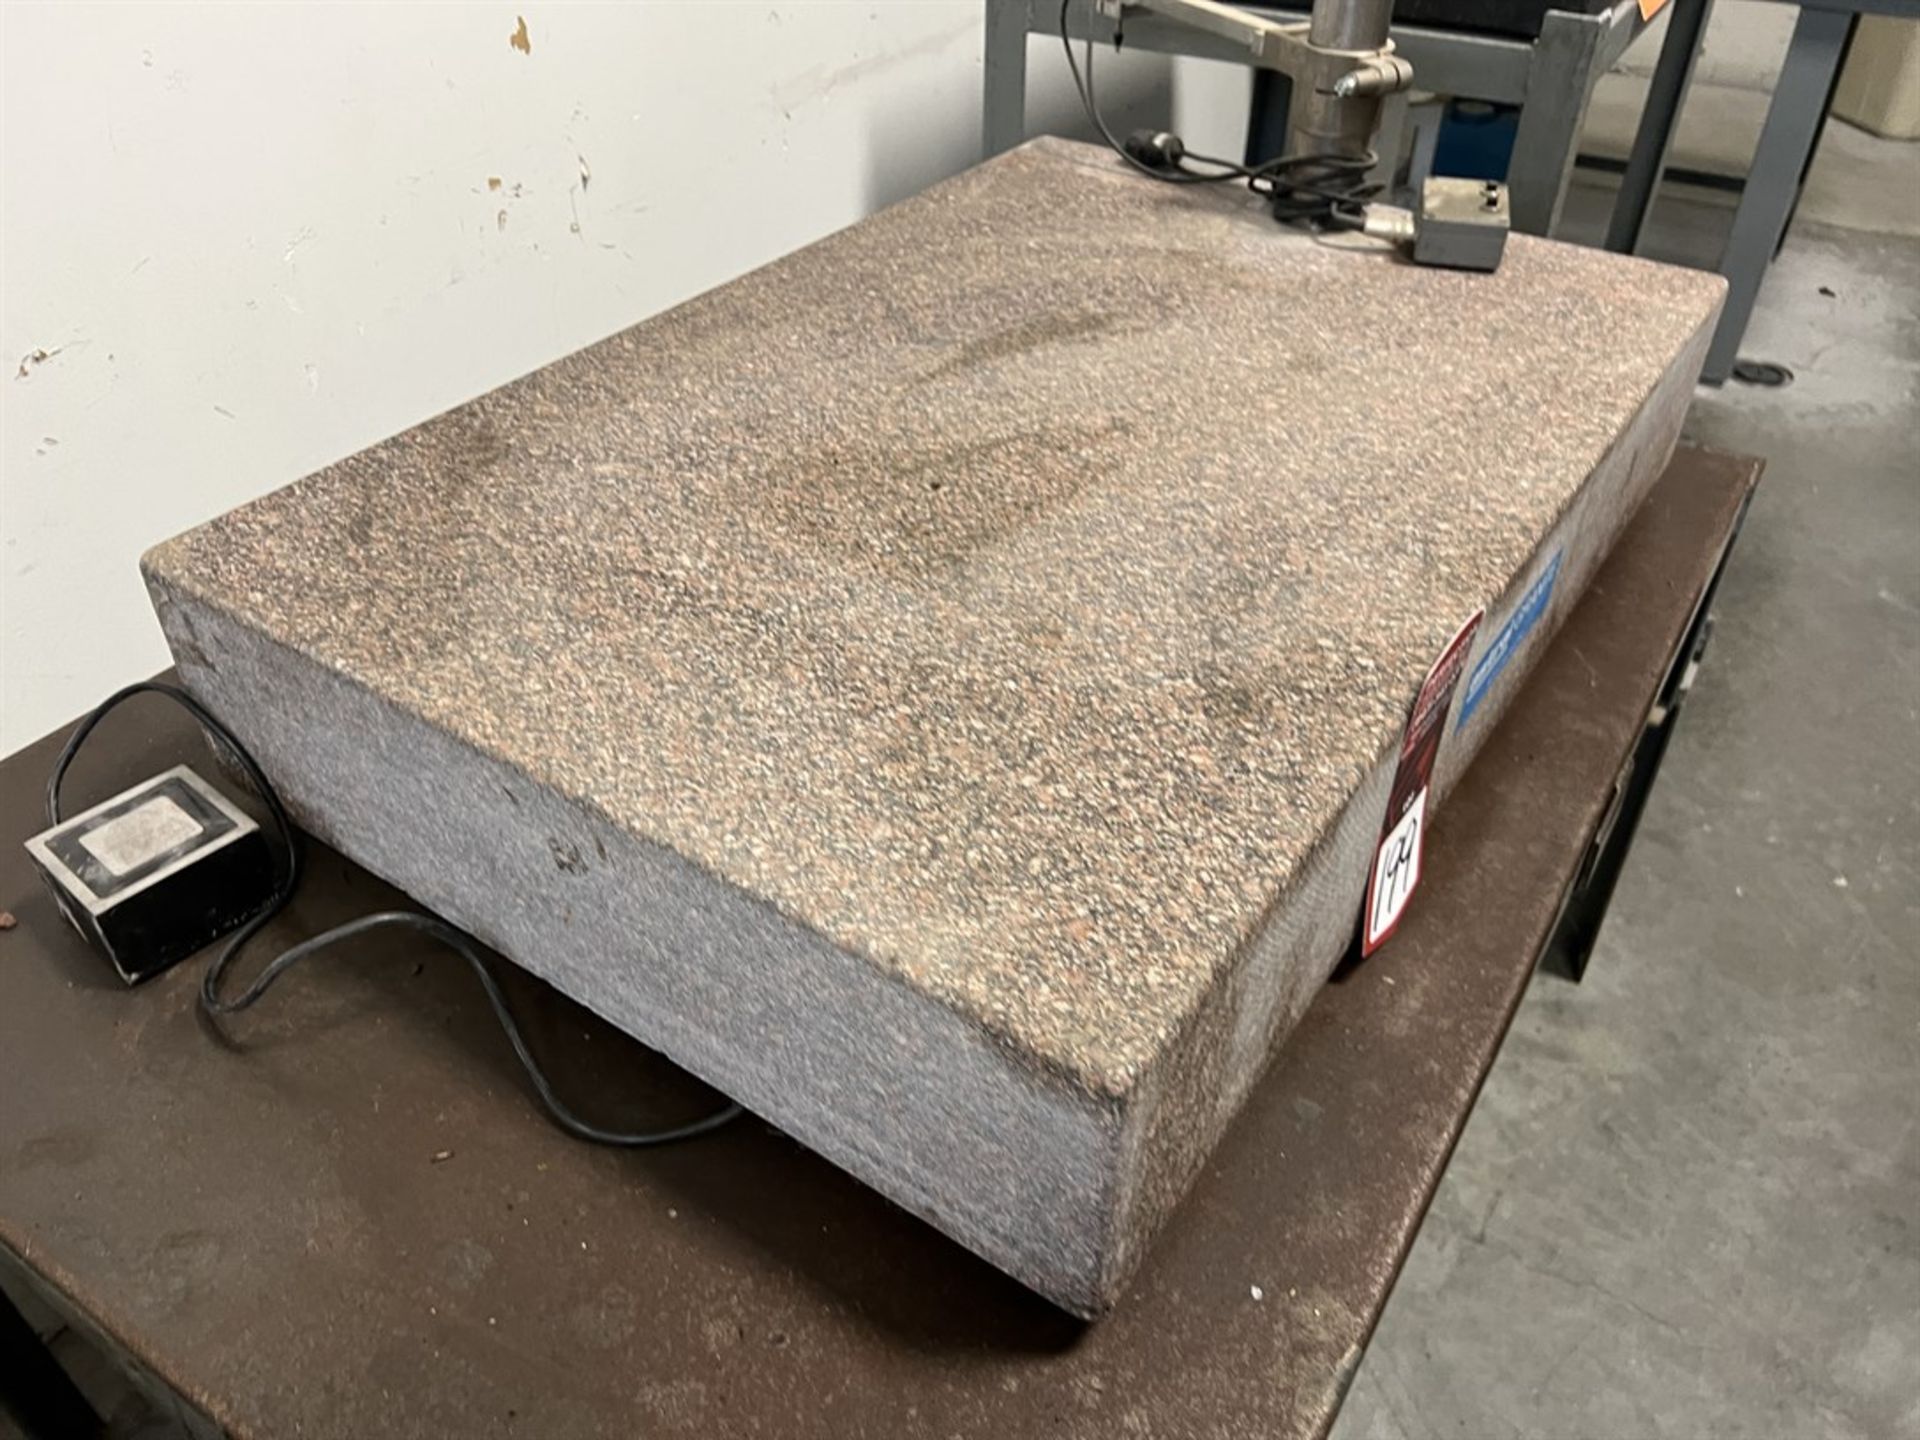 ASTRAL Granite Surface Plate, 24" x 36" x 6" on Steel Base - Image 3 of 3